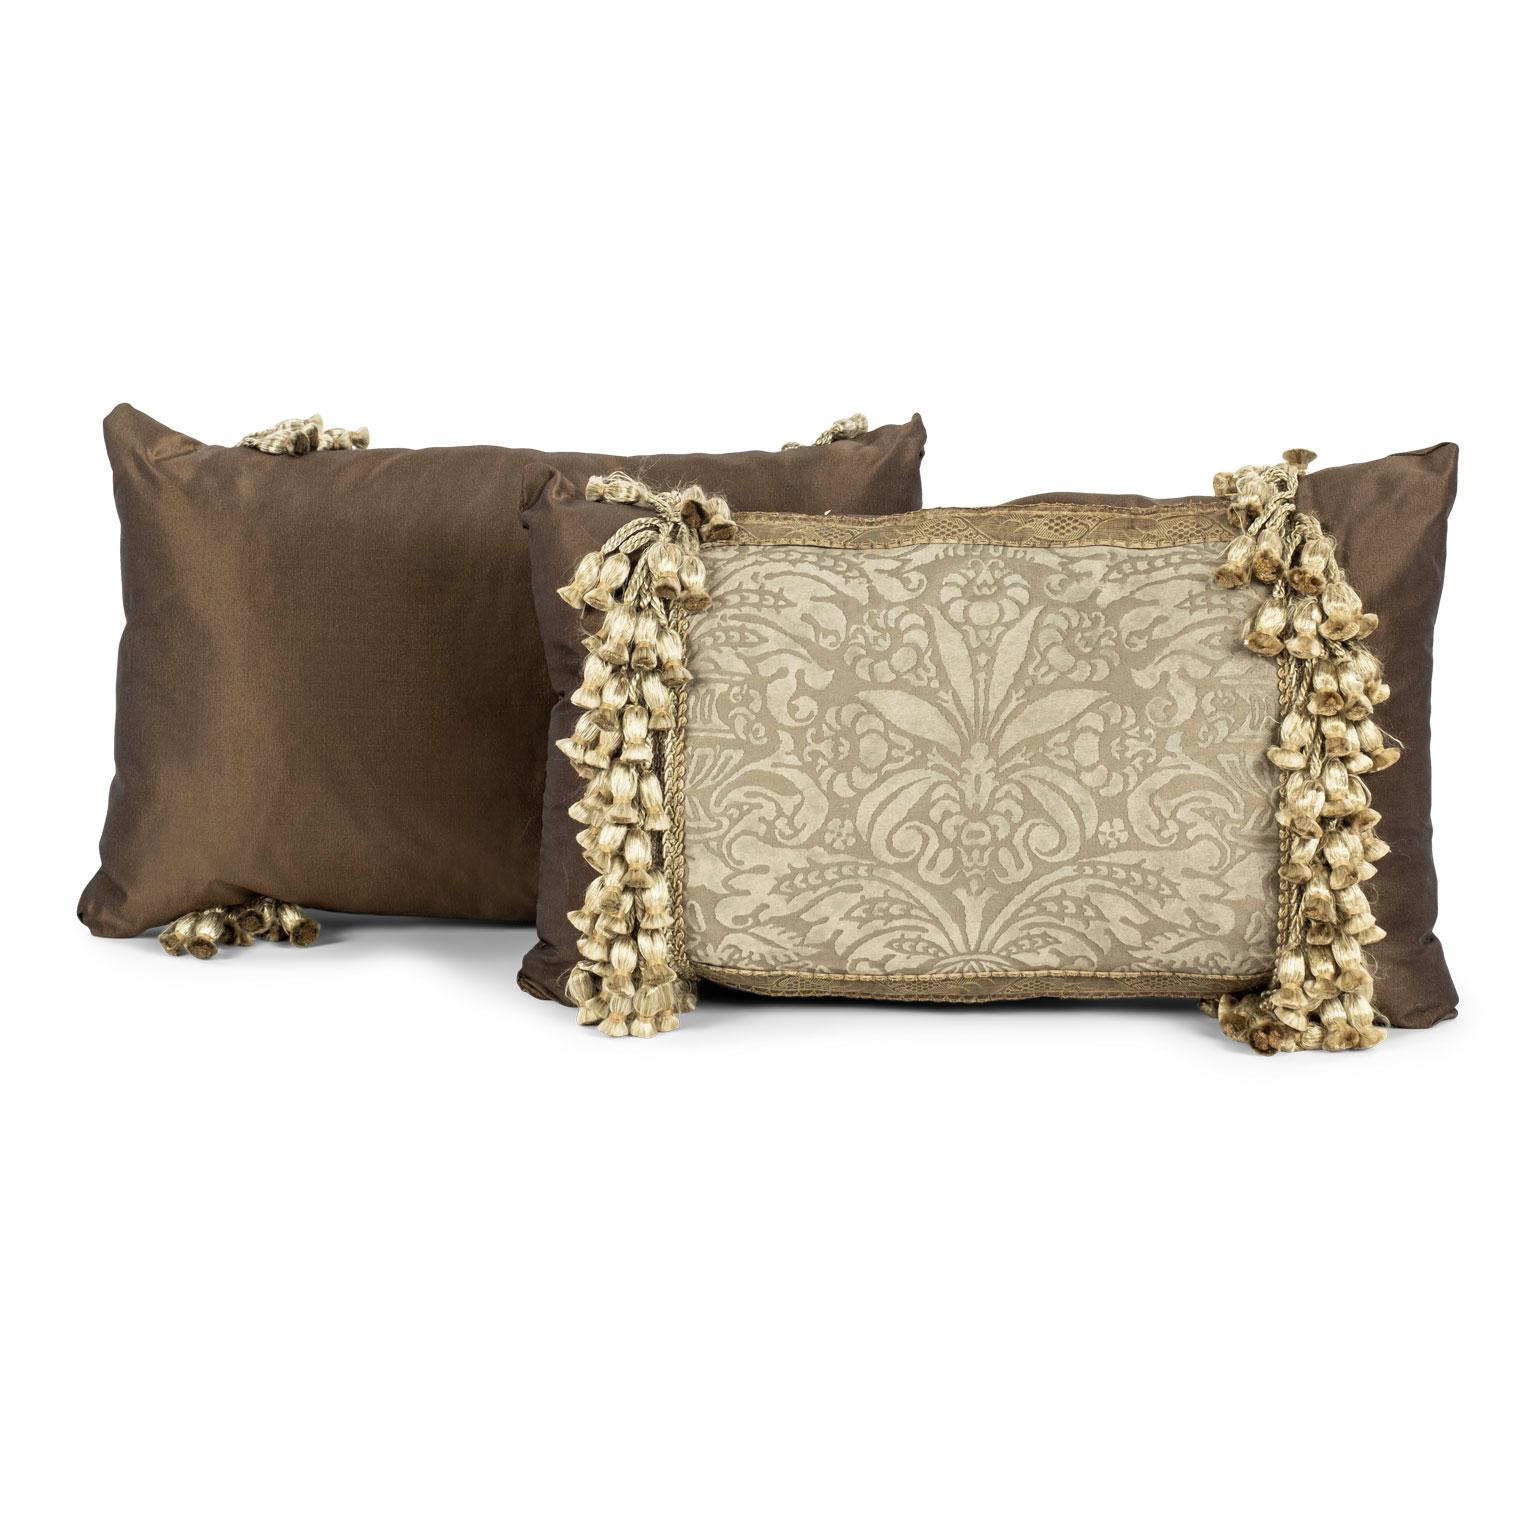 Pair of vintage Fortuny cushions in taupe and brown. Trimmed in silk tassels. Sold together and priced $985 for the pair.